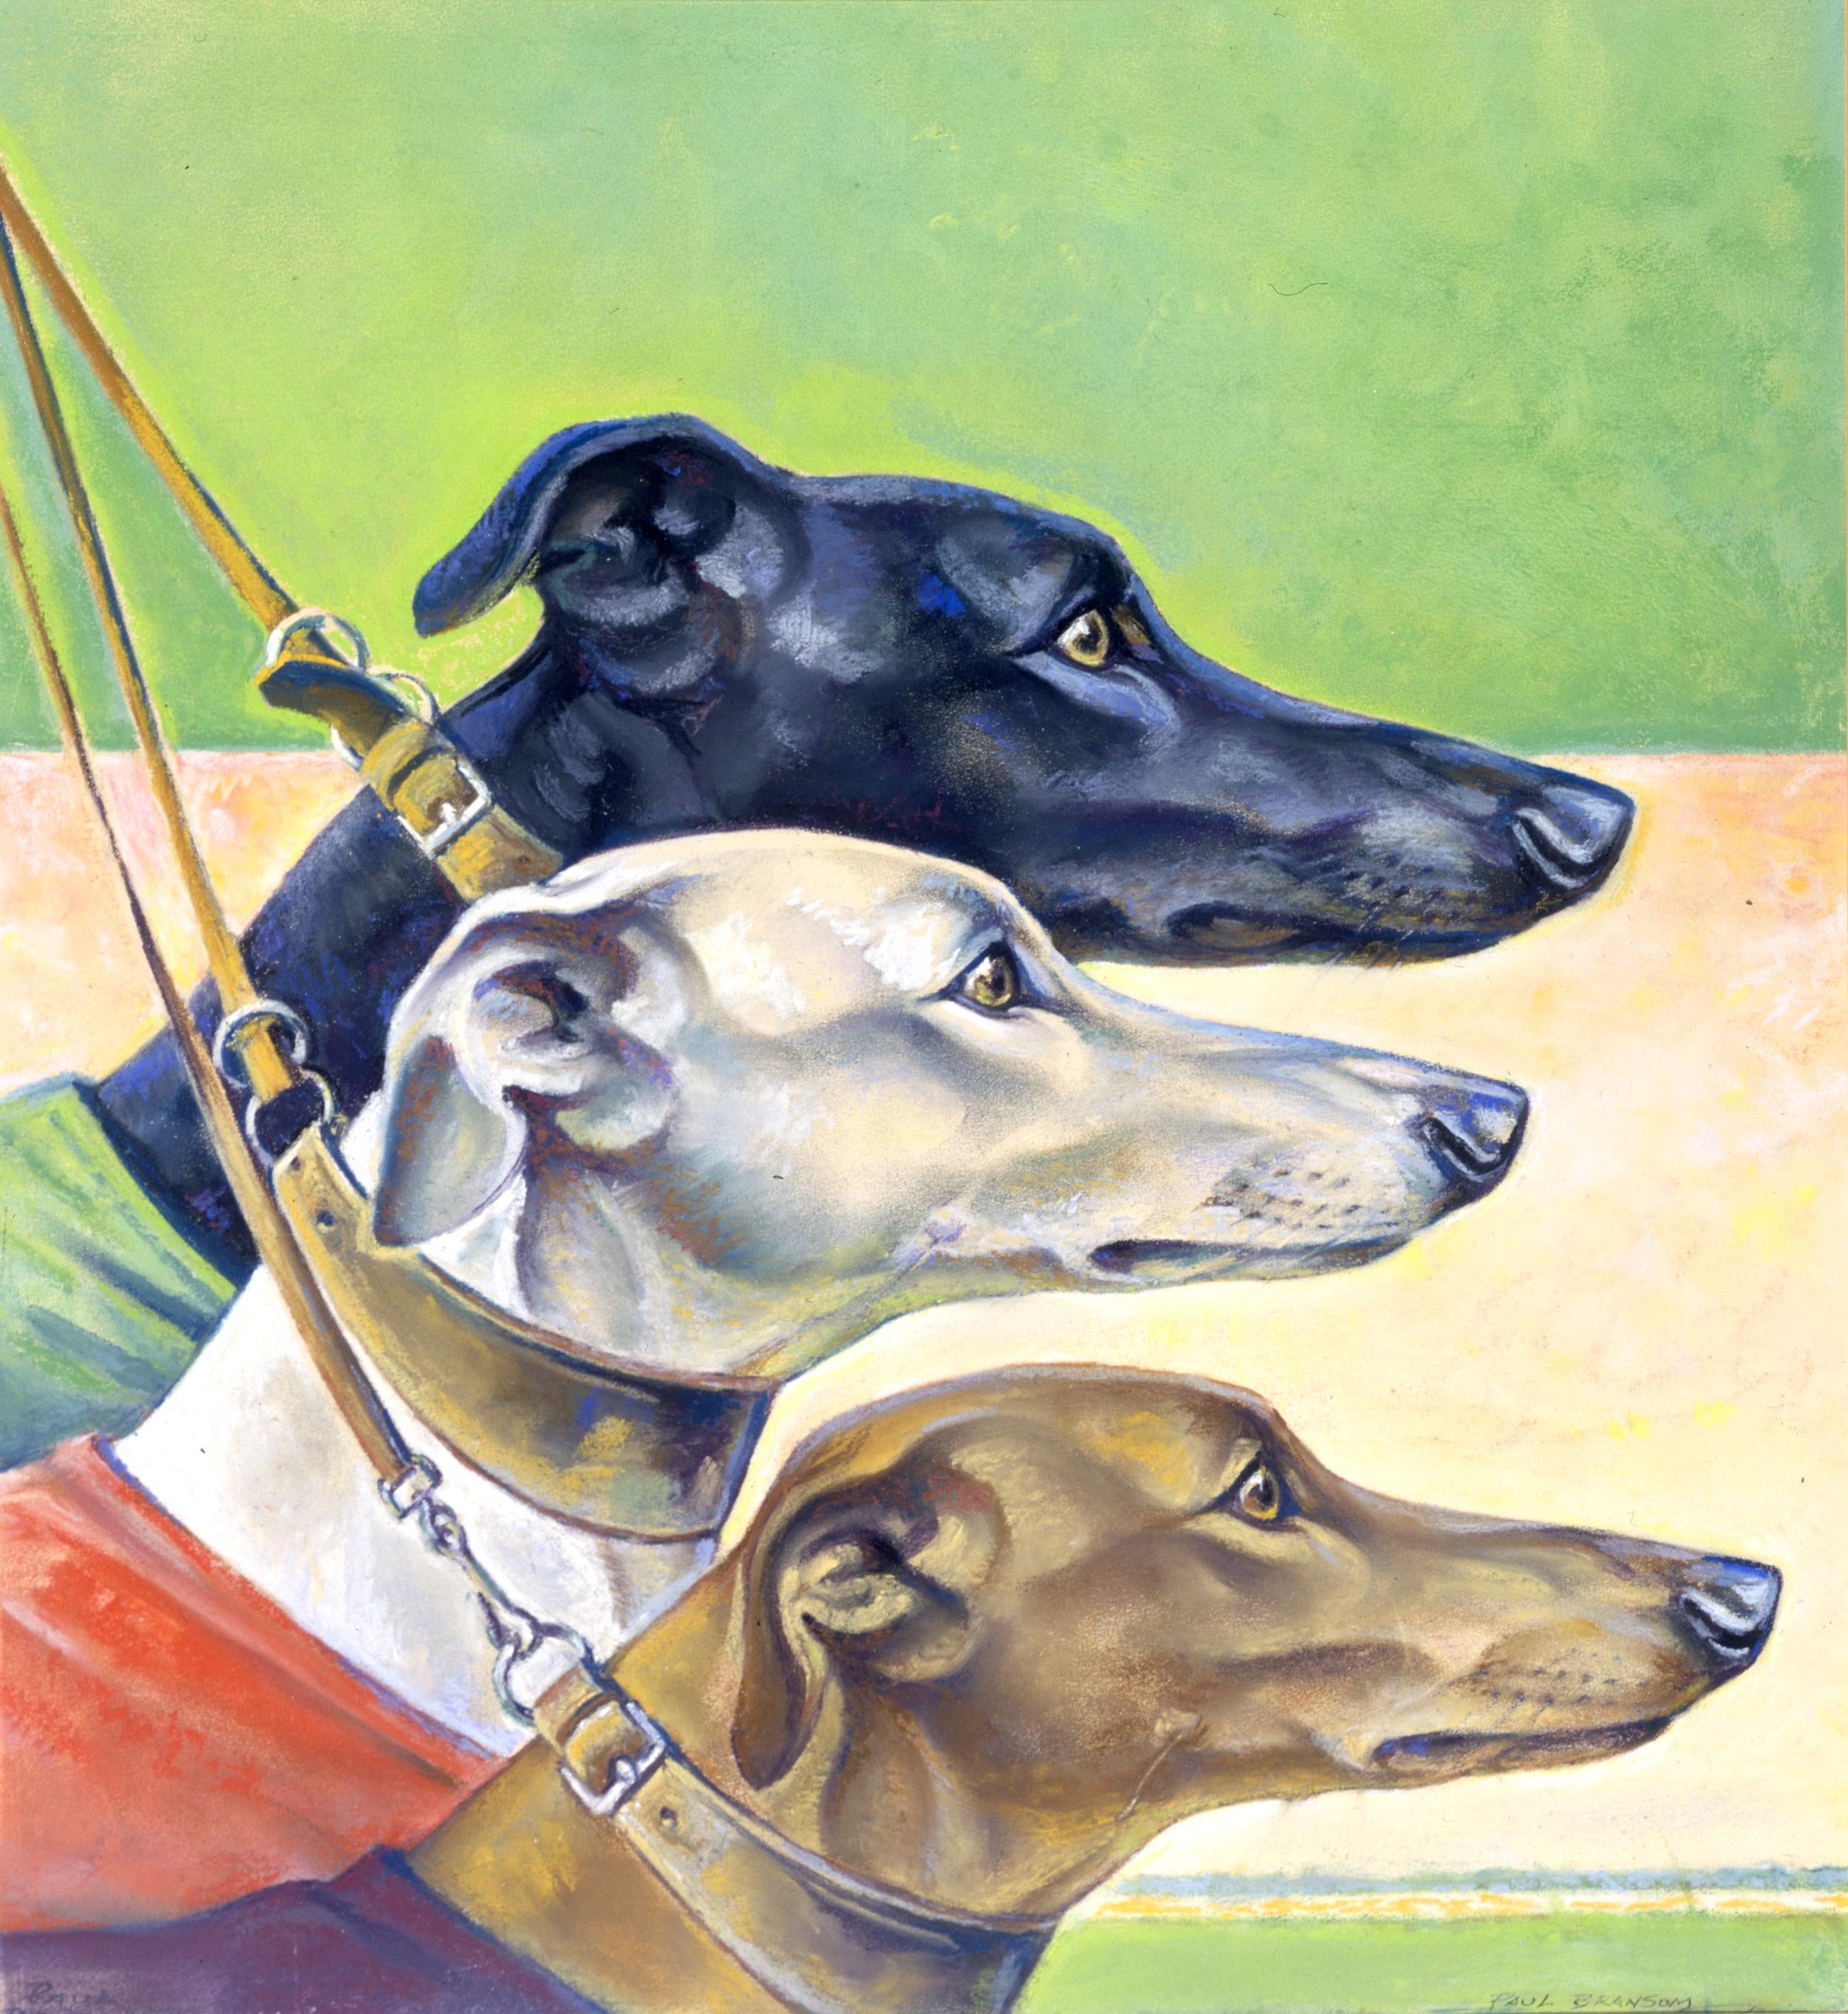   Paul Bransom (1885-1981)   Racing Dogs  1941, pastel on paper 20” x 18”, signed lower right  Saturday Evening Post,  March 29, 1941 cover 